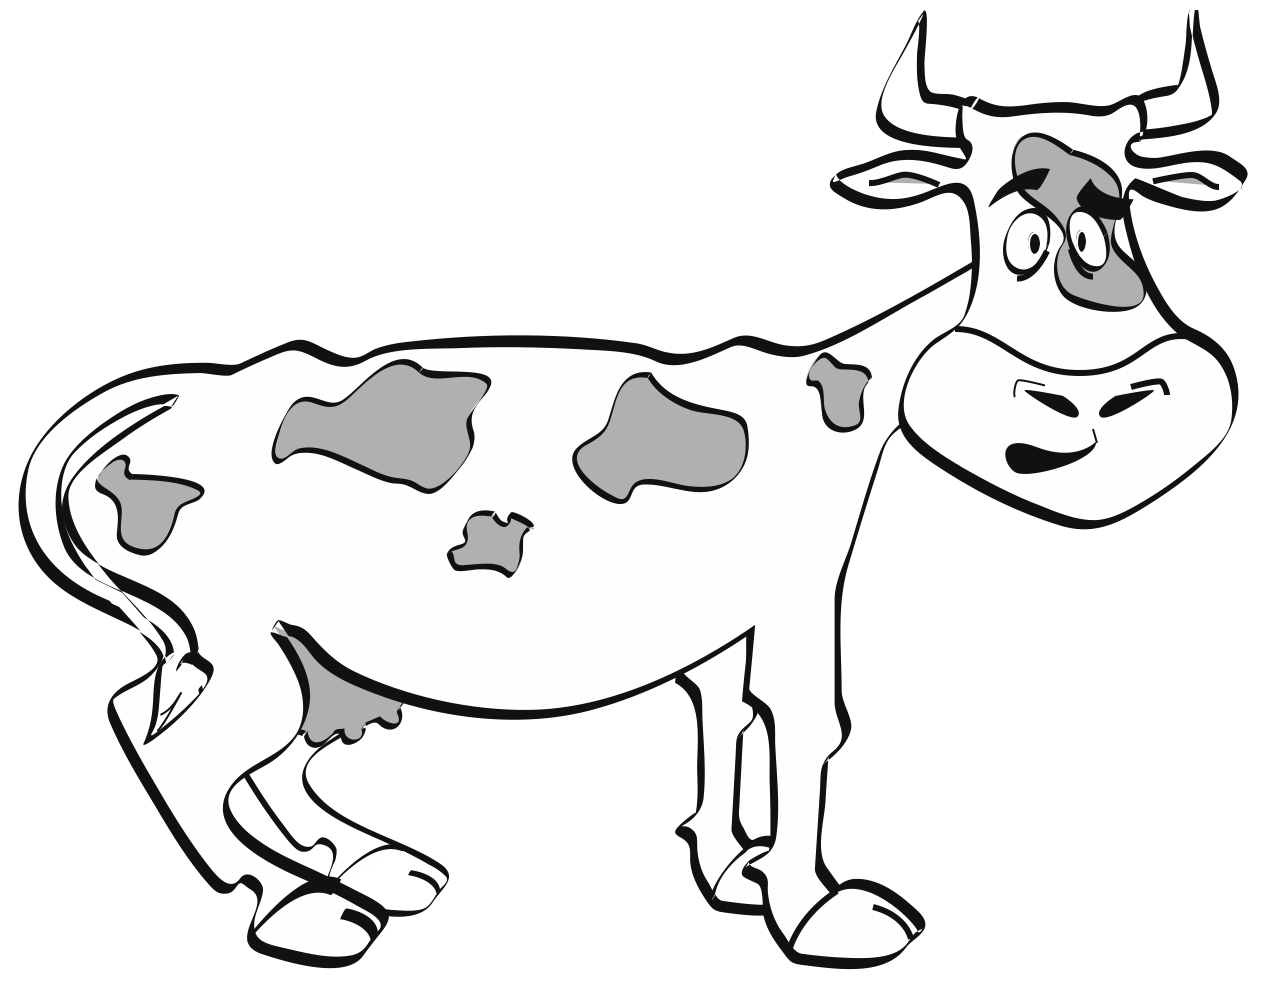 Cow-Graphic